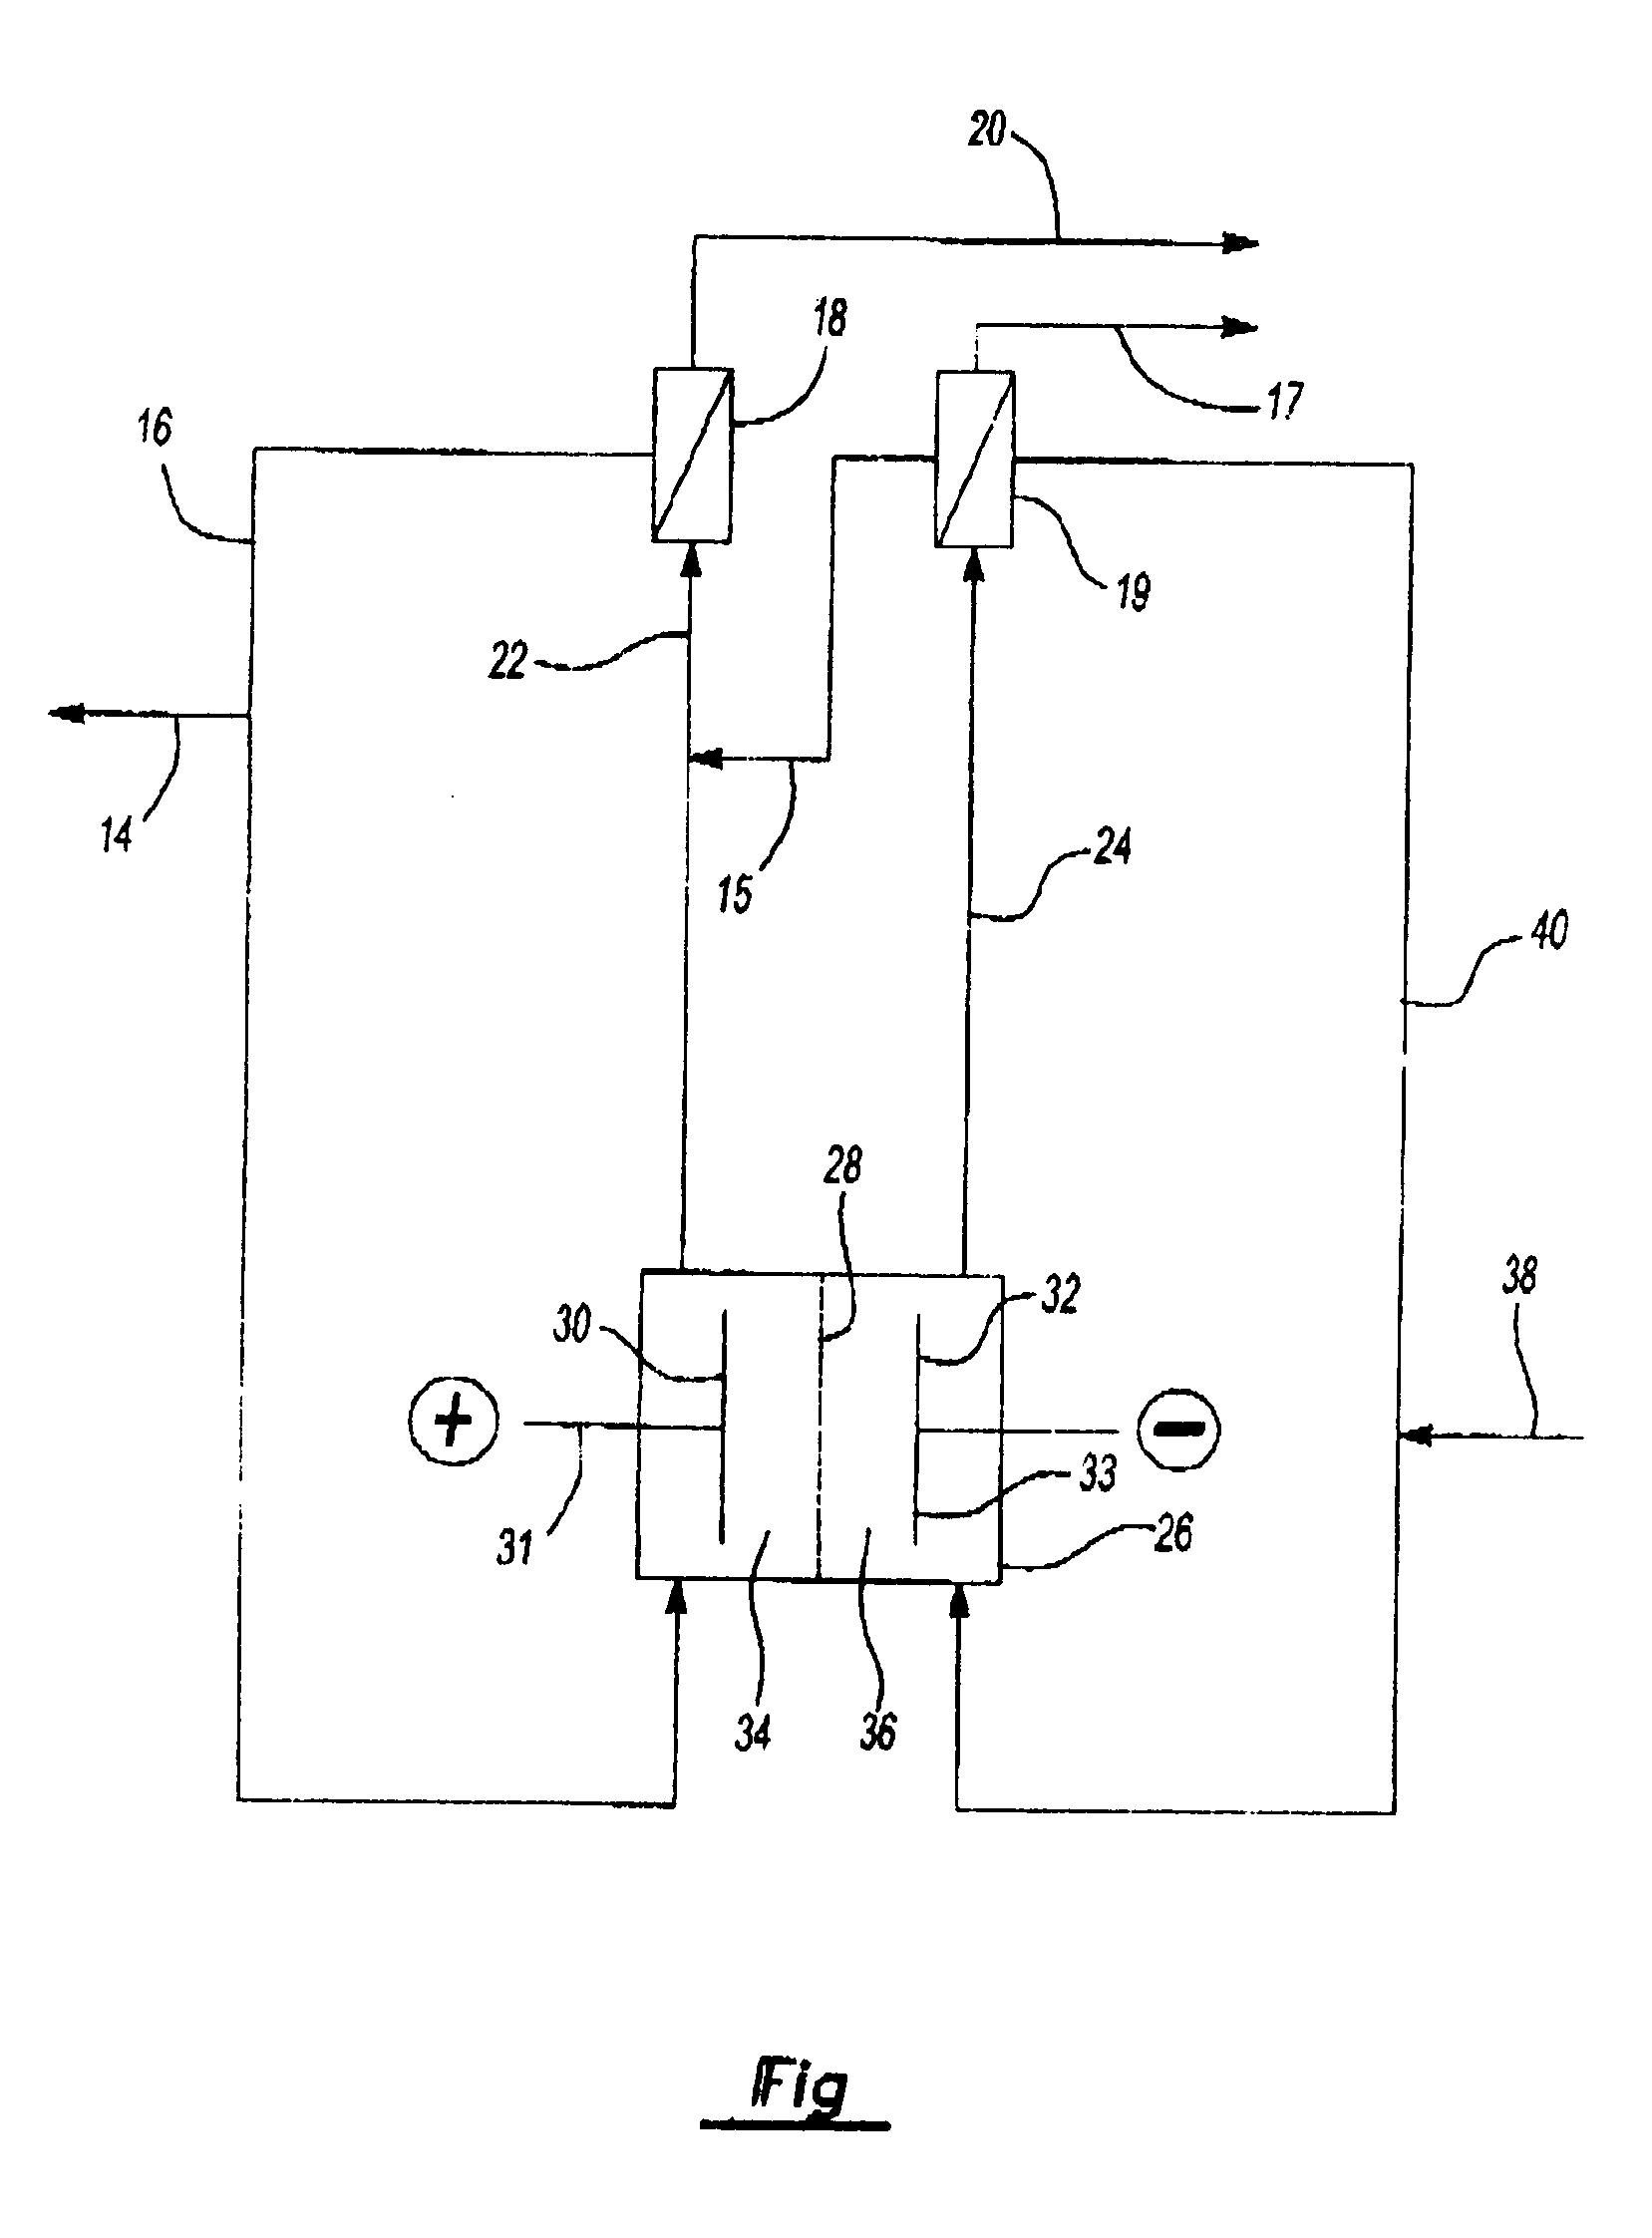 Low energy chlorate electrolytic cell and process